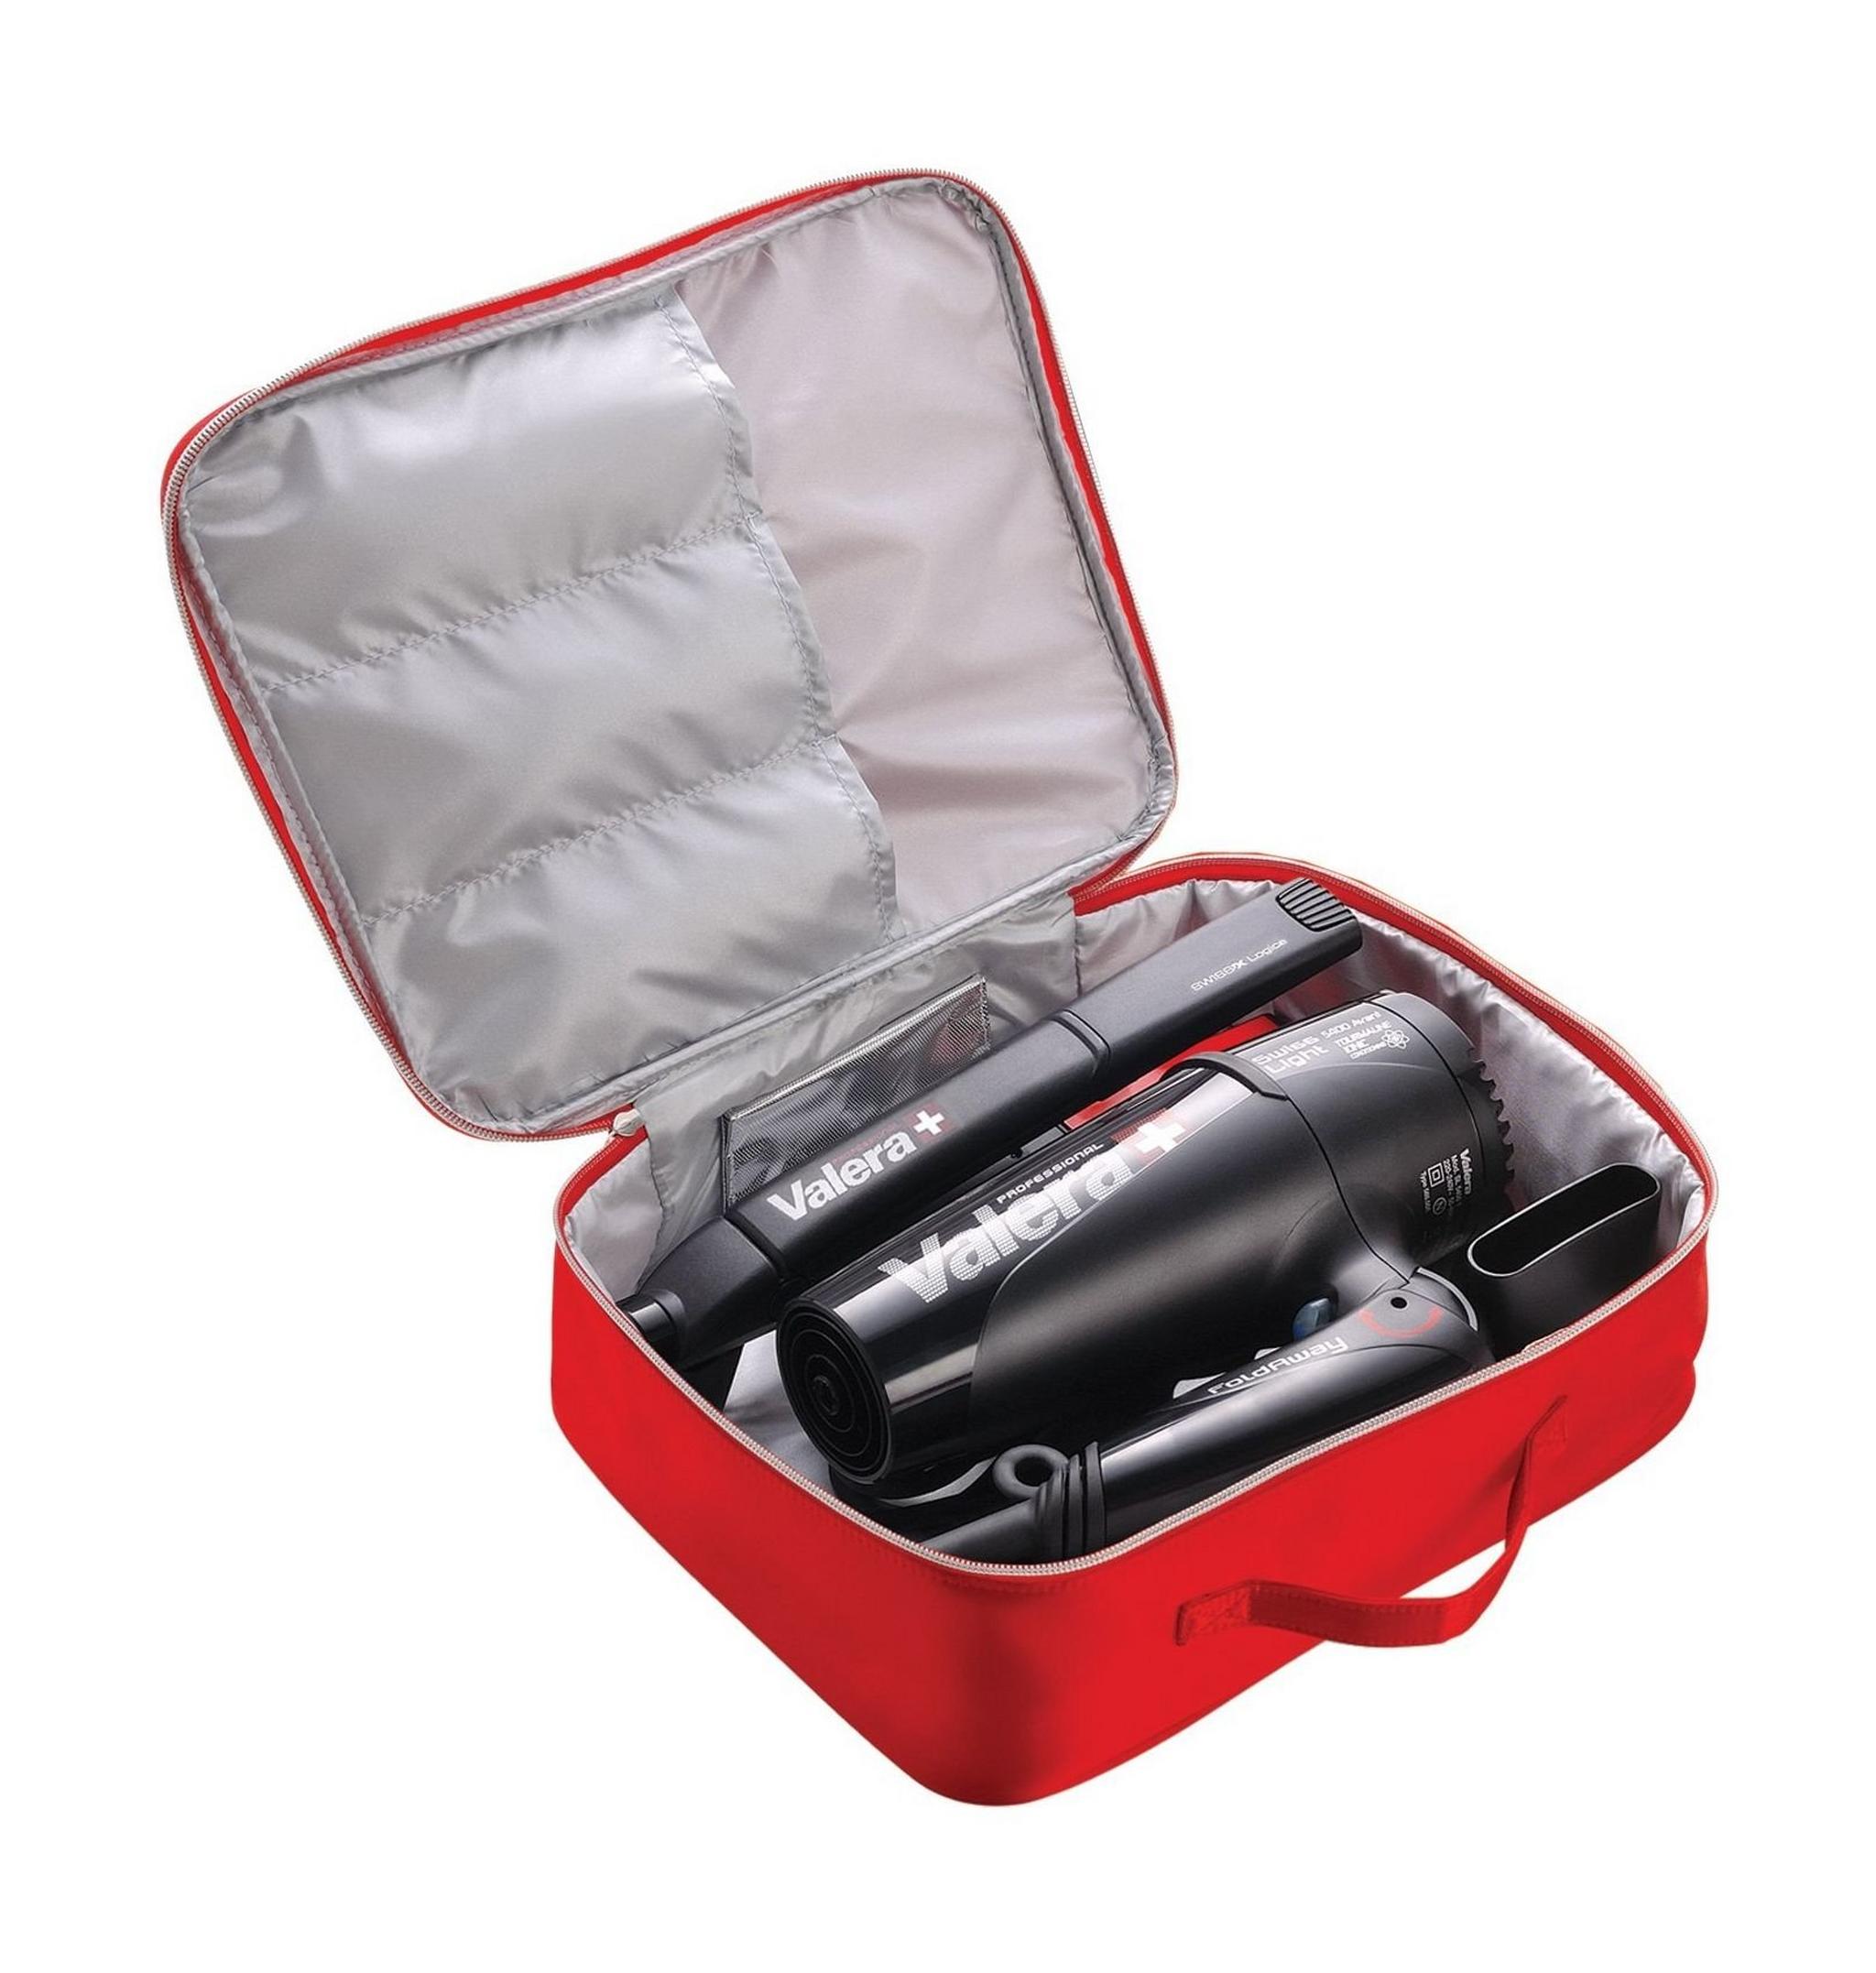 Valera Swiss Professional Travel Ions Hair Dryer and Straightener Styling Set (560STS)